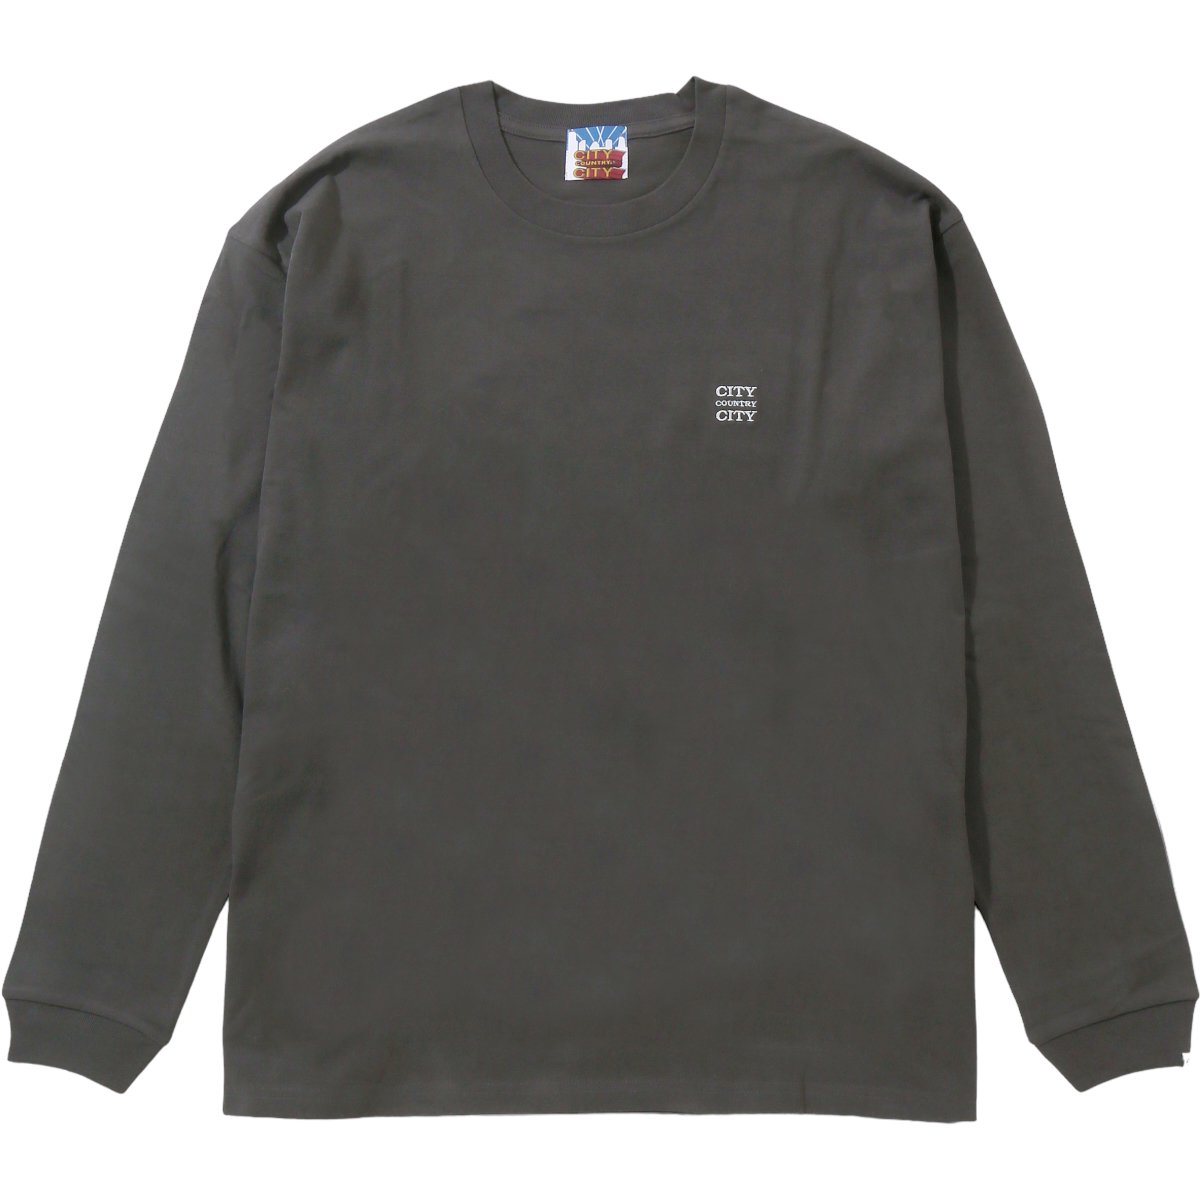 CITY COUNTRY CITY<BR>EMBROIDERED LOGO COTTON L/S T-SHIRT(CHARCOAL GRAY)